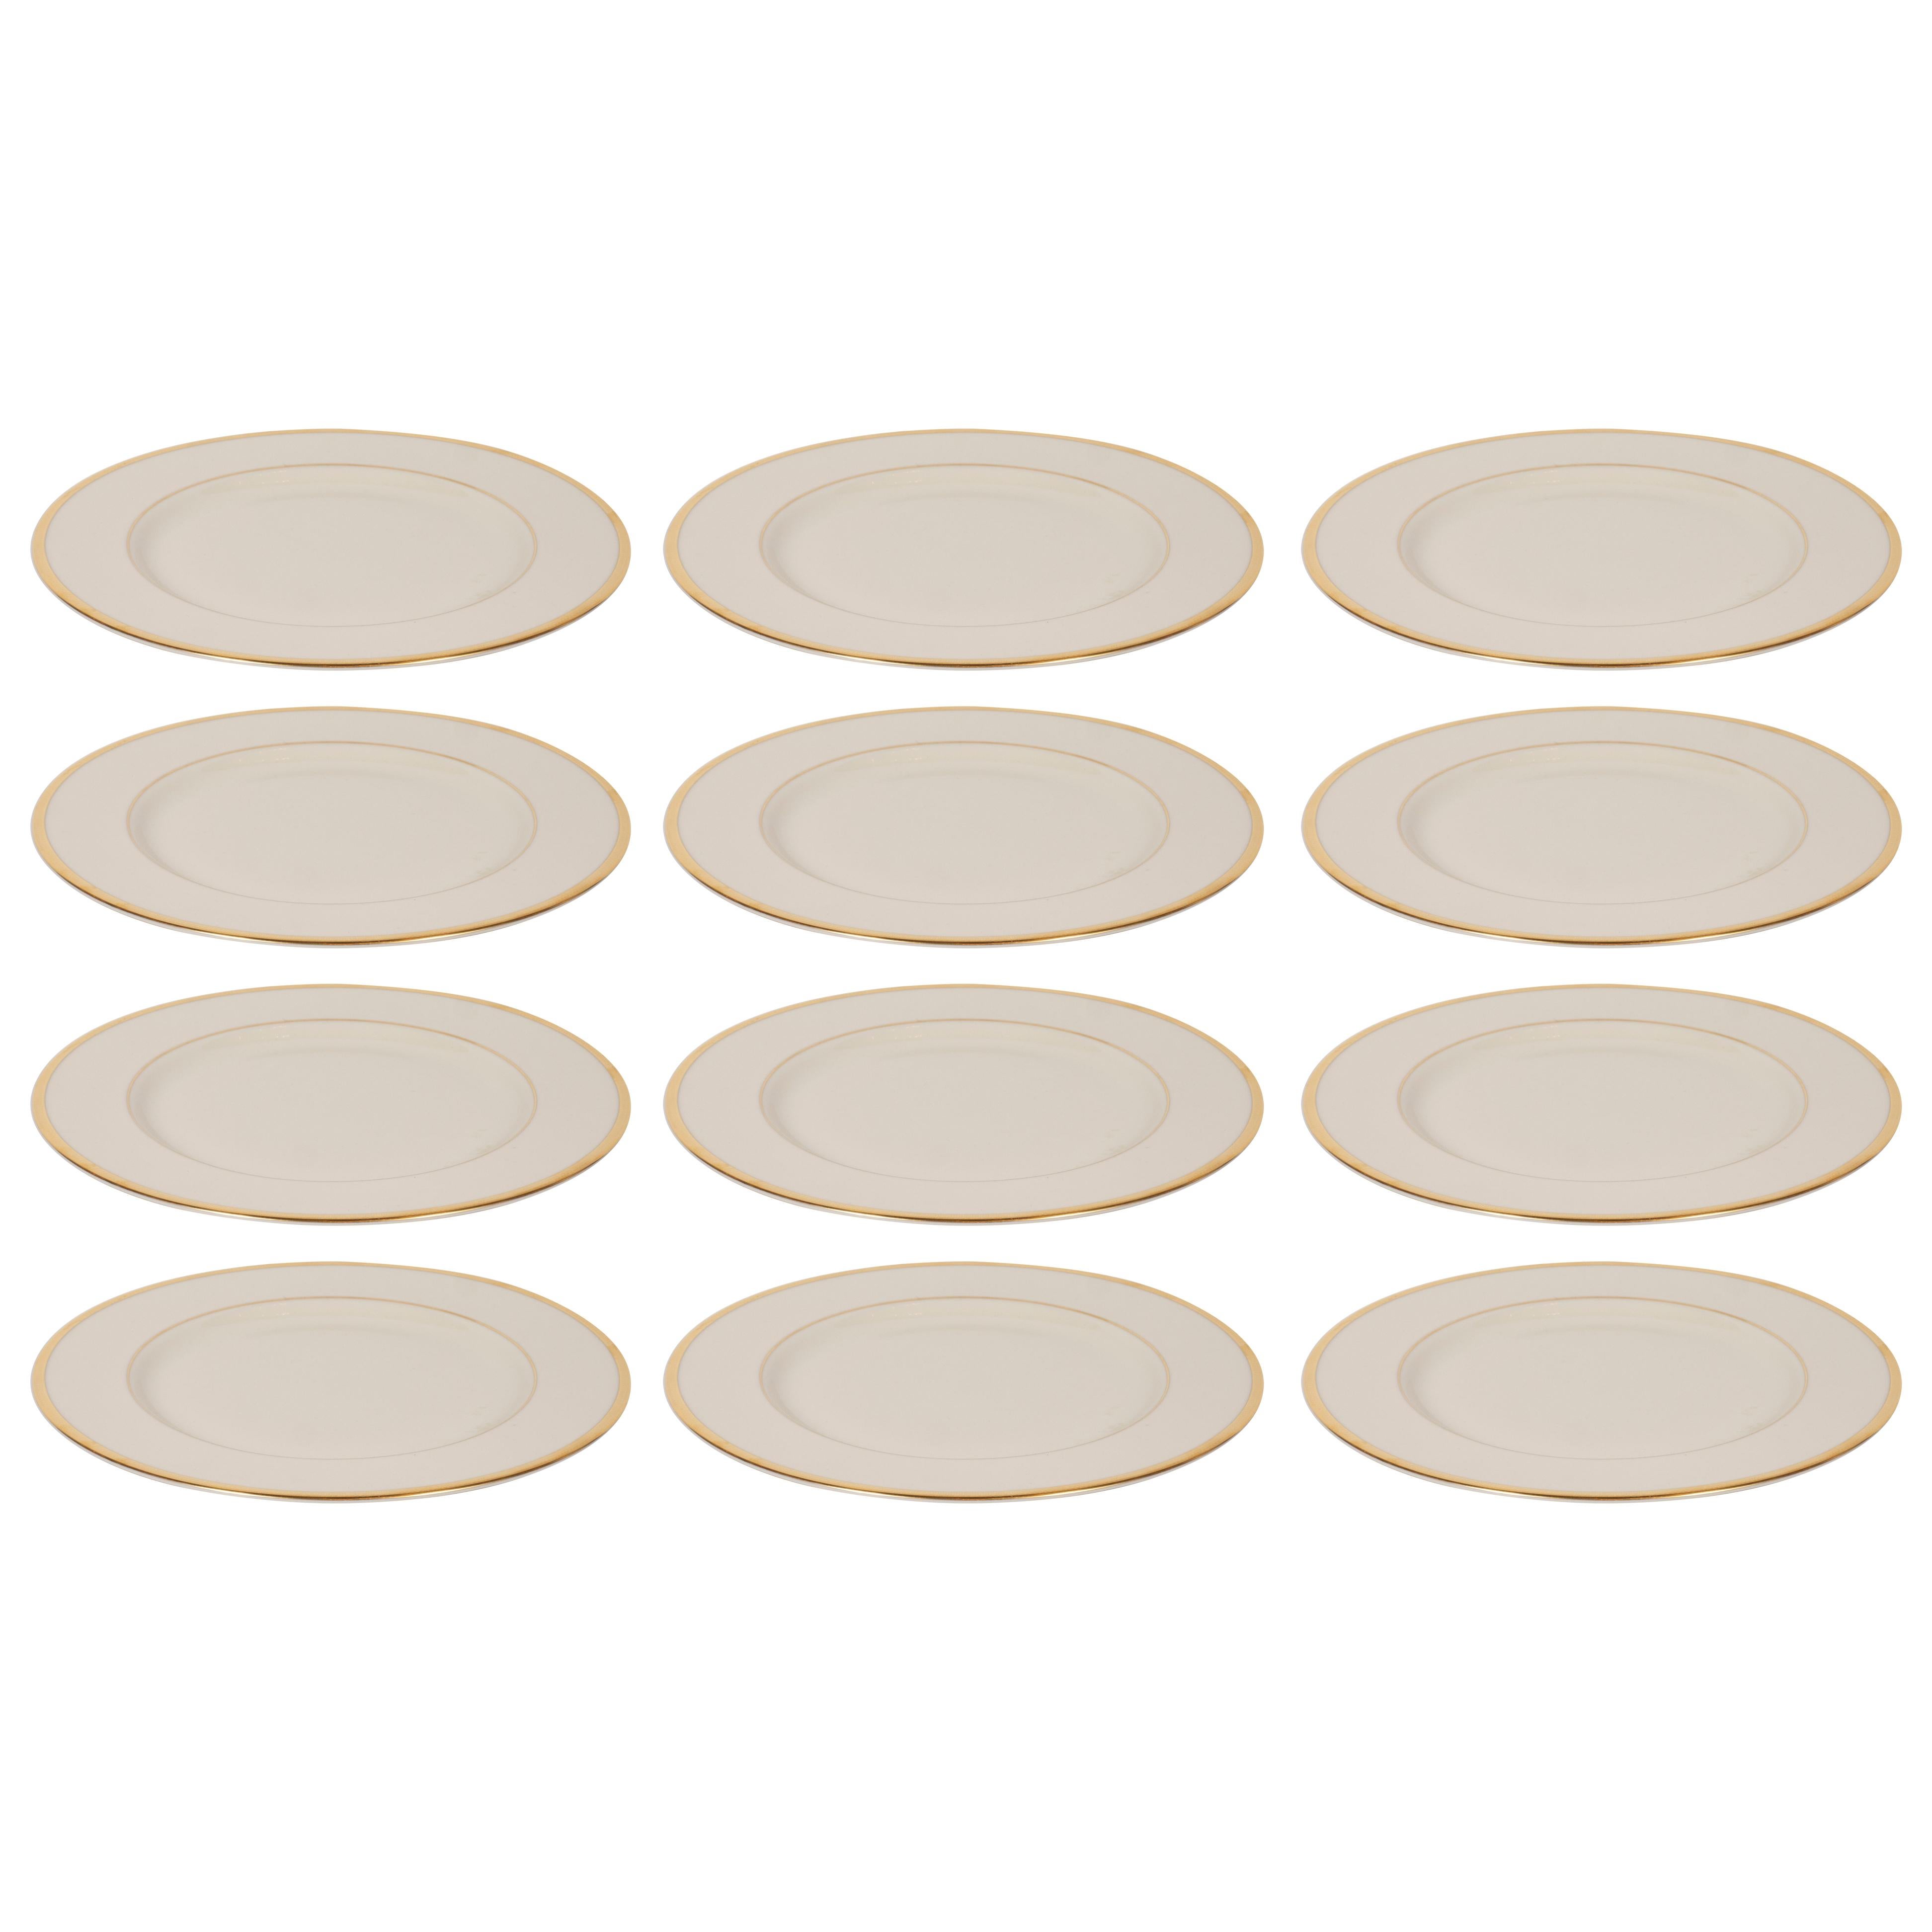 This elegant set of 12 dinner plates were realized by the esteemed maker Lenox in the United States. They feature 24-karat gold banding in the center, as well as along the outer perimeter on a bone china background. With their clean modernist lines